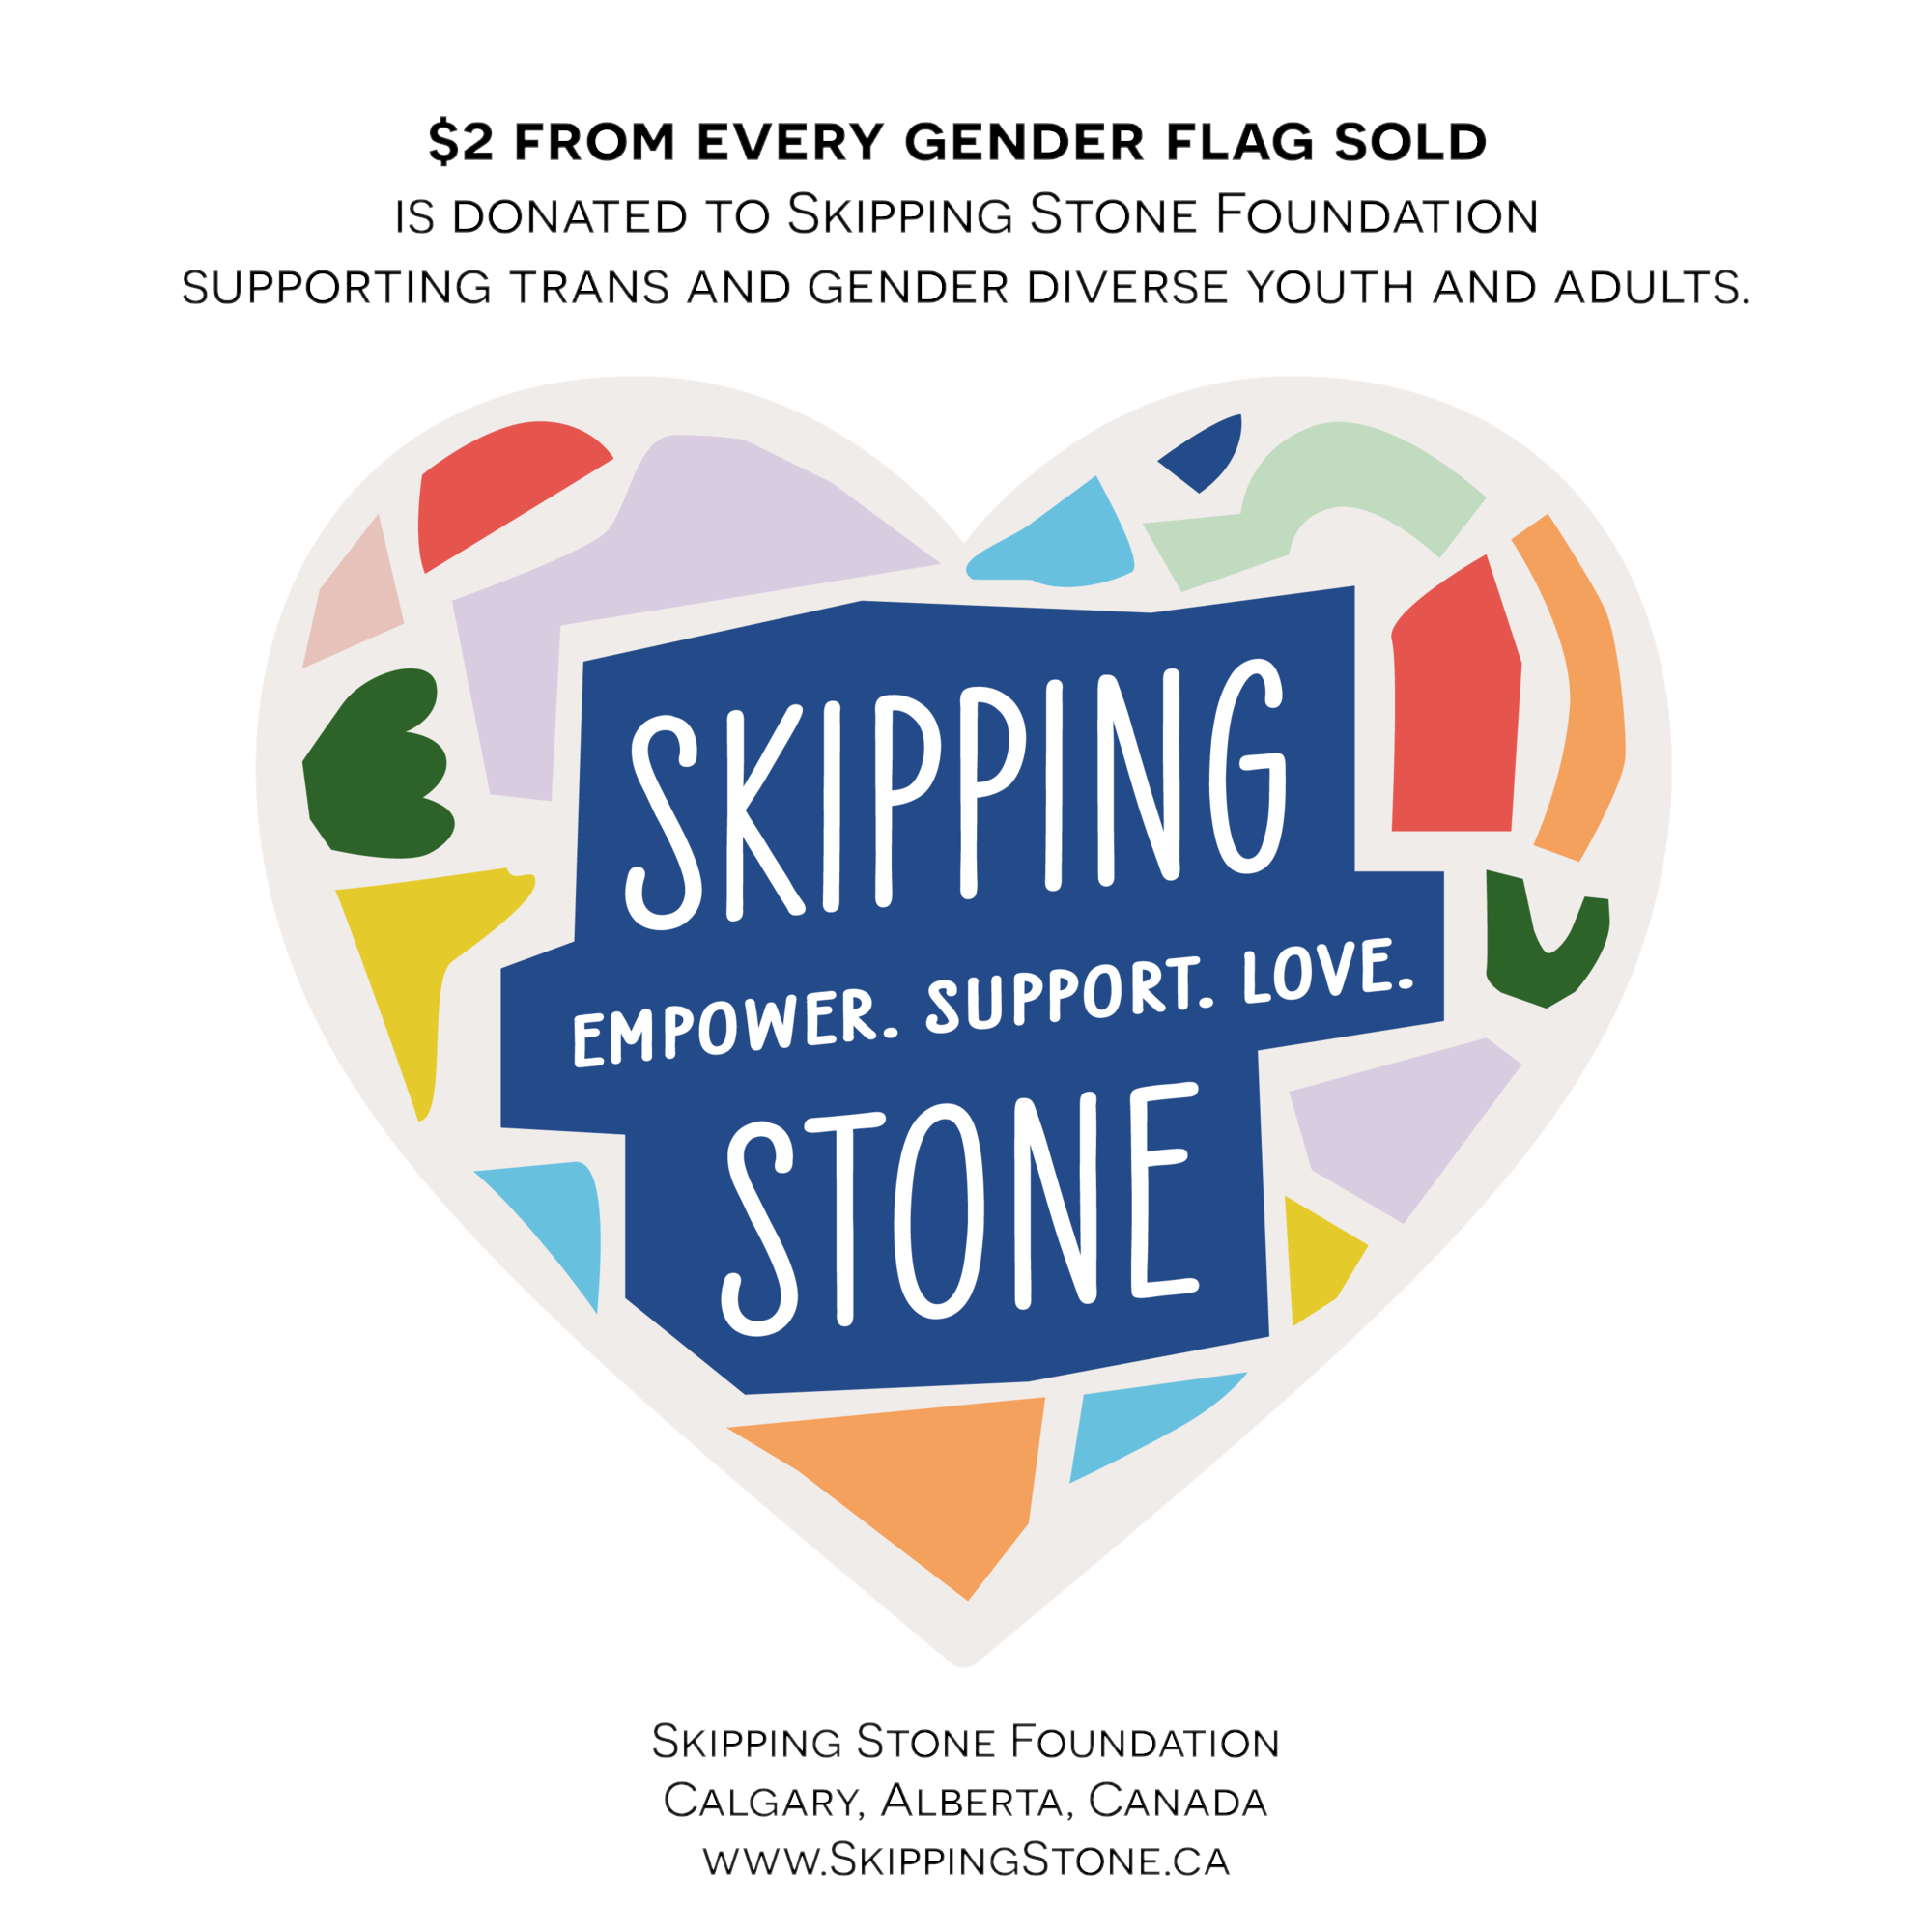 Colourful mosaic heart logo with the words: Skipping Stone. Empower. Support. Love. Above the logo the text: Supporting trans ans gender diverse youth and adults. Below the text: Skipping Stone Foundation, Calgary, Alberta, Canada, www.SkippingStone.ca